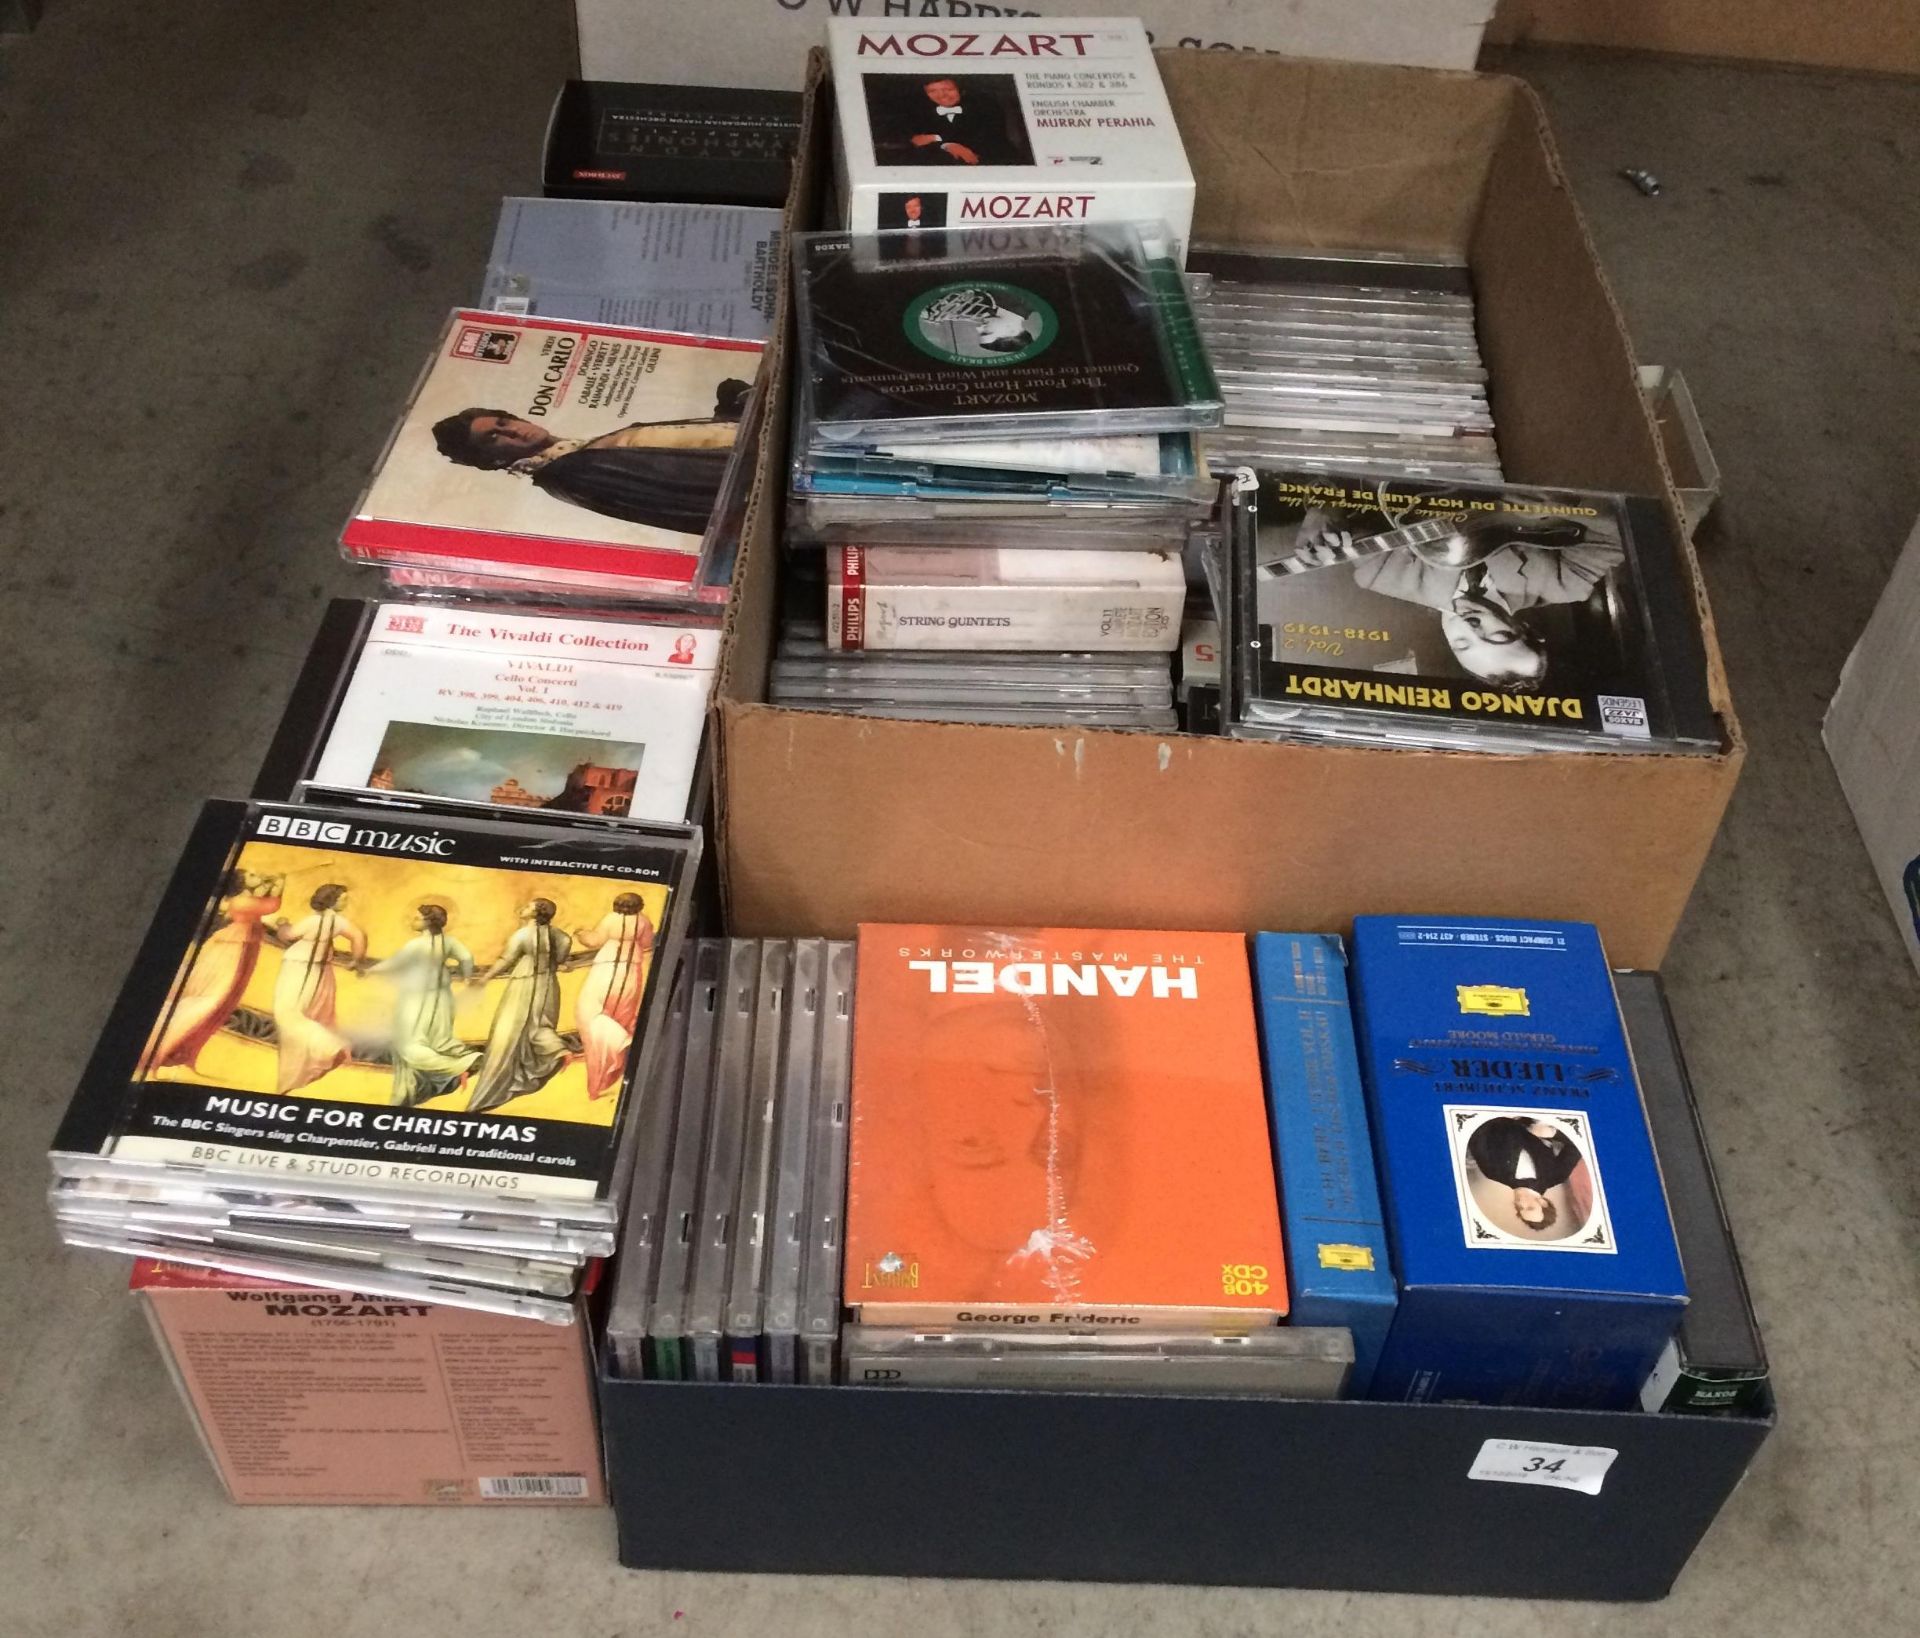 One hundred and sixty music CDs - mainly